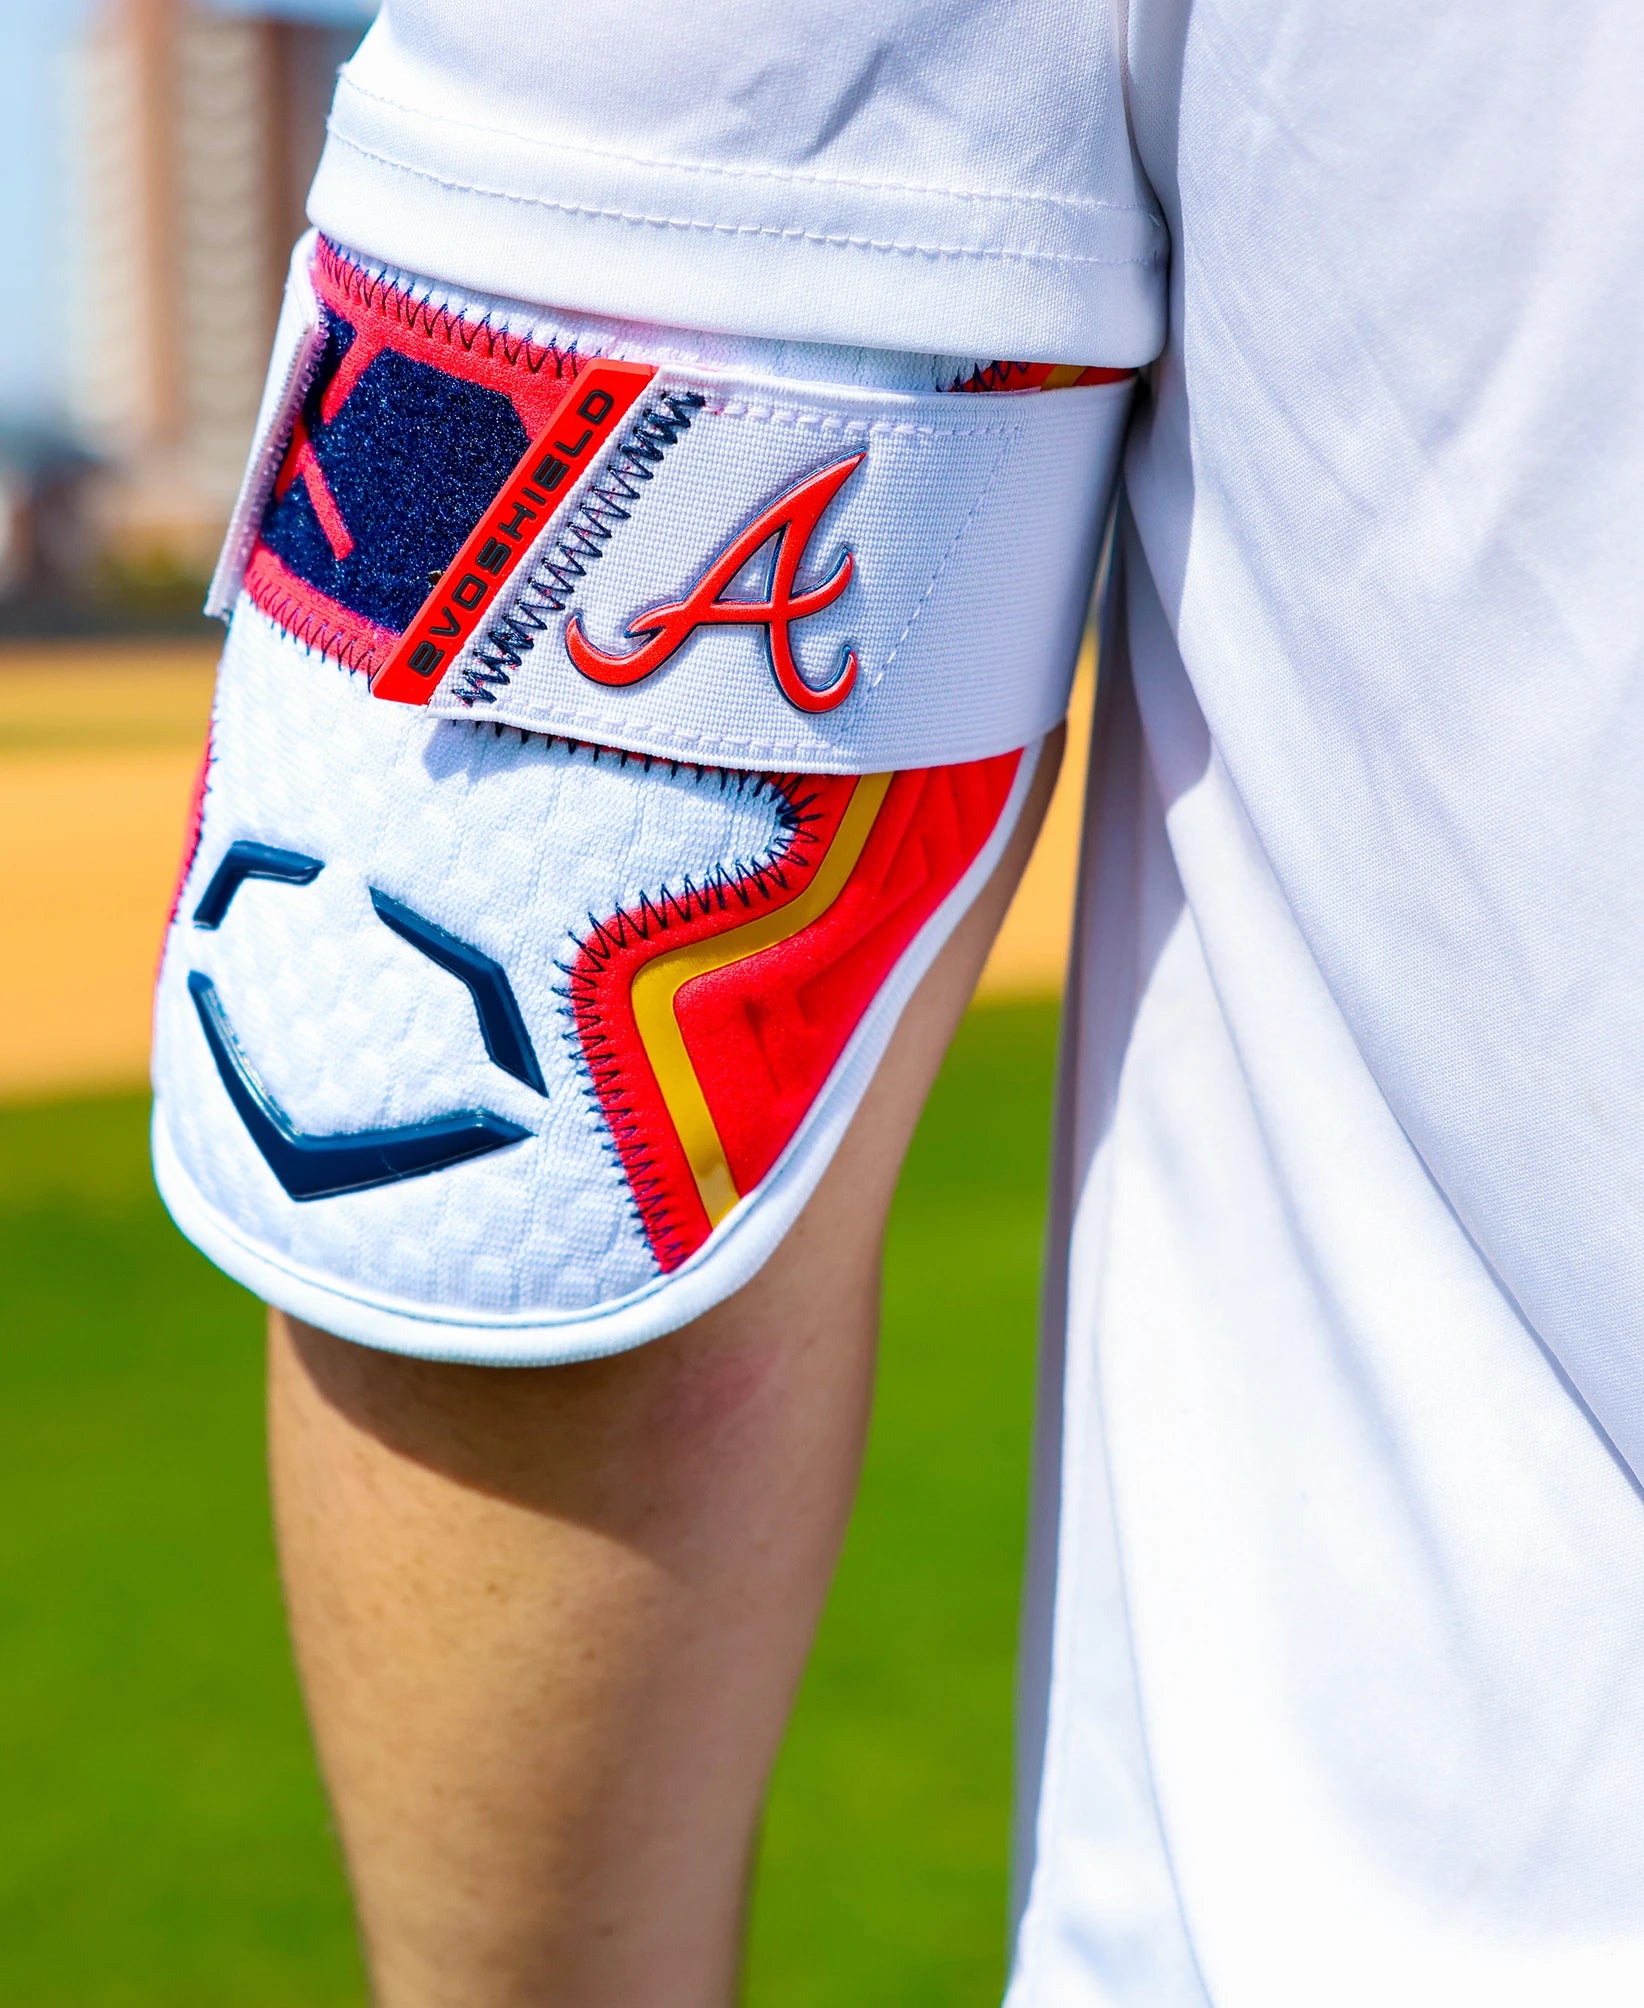 EvoShield PRO-SRZ 2.0 ON FIELD COLLECTION BATTER'S ELBOW GUARD: BRAVES